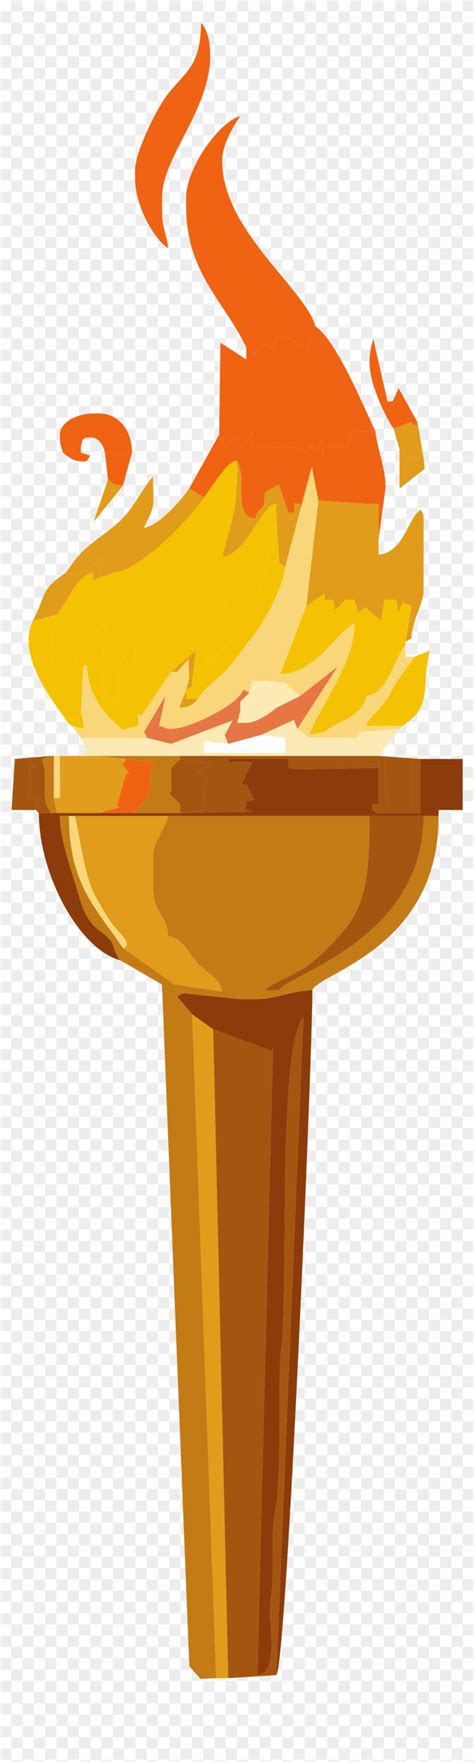 Flashlight Clipart Phone Olympic Torch Clip Art Png